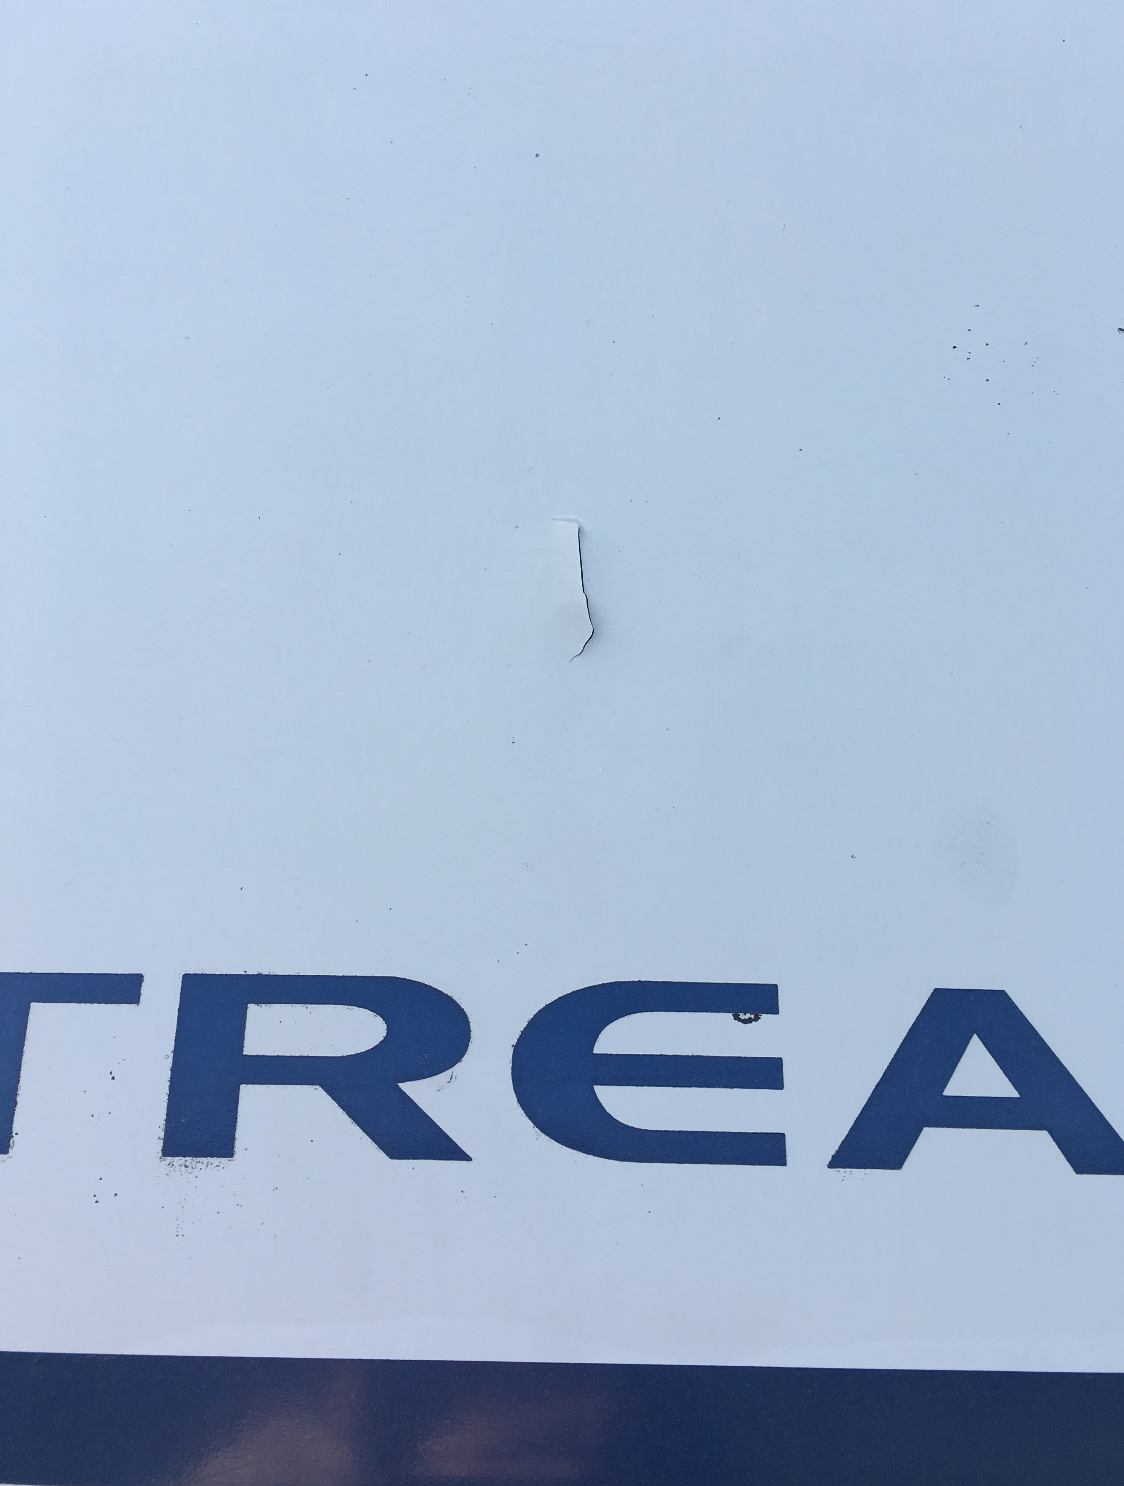 Crack/peeling off on the right side of the hull